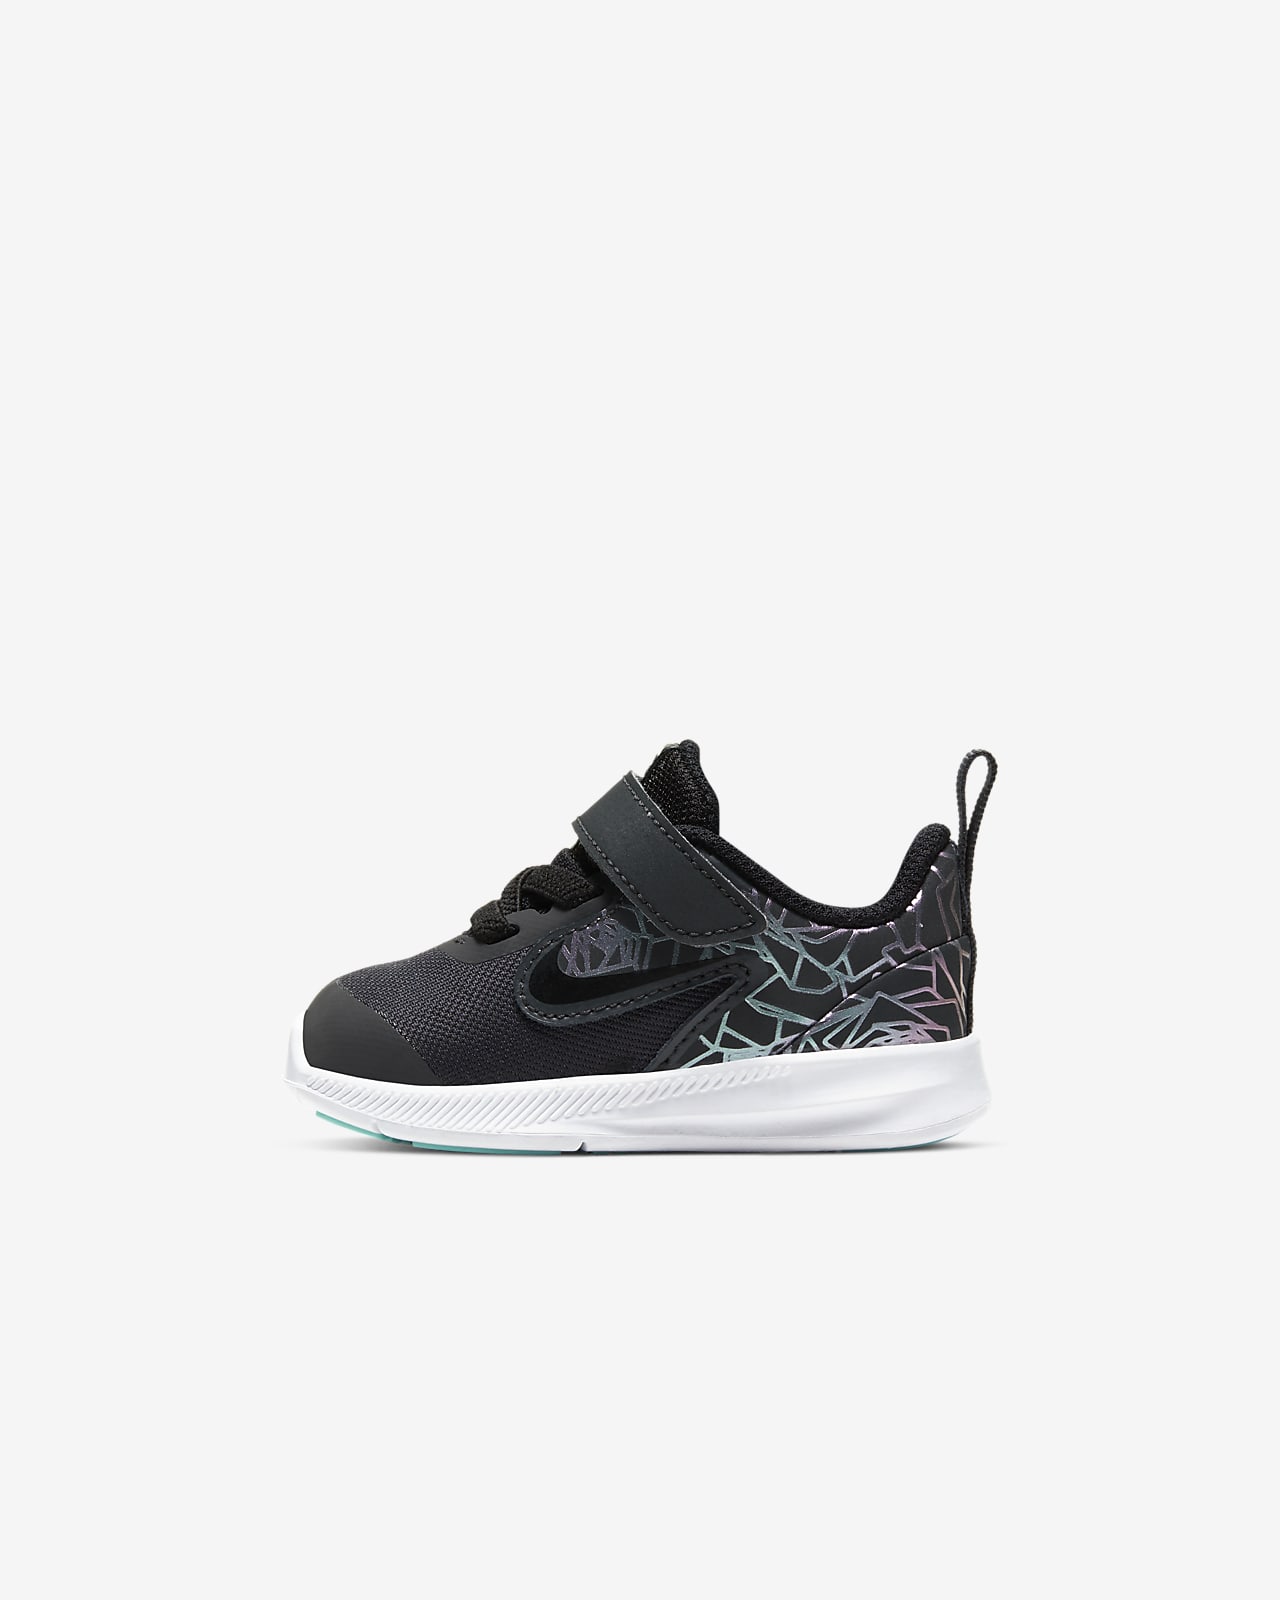 nike youth downshifter 9